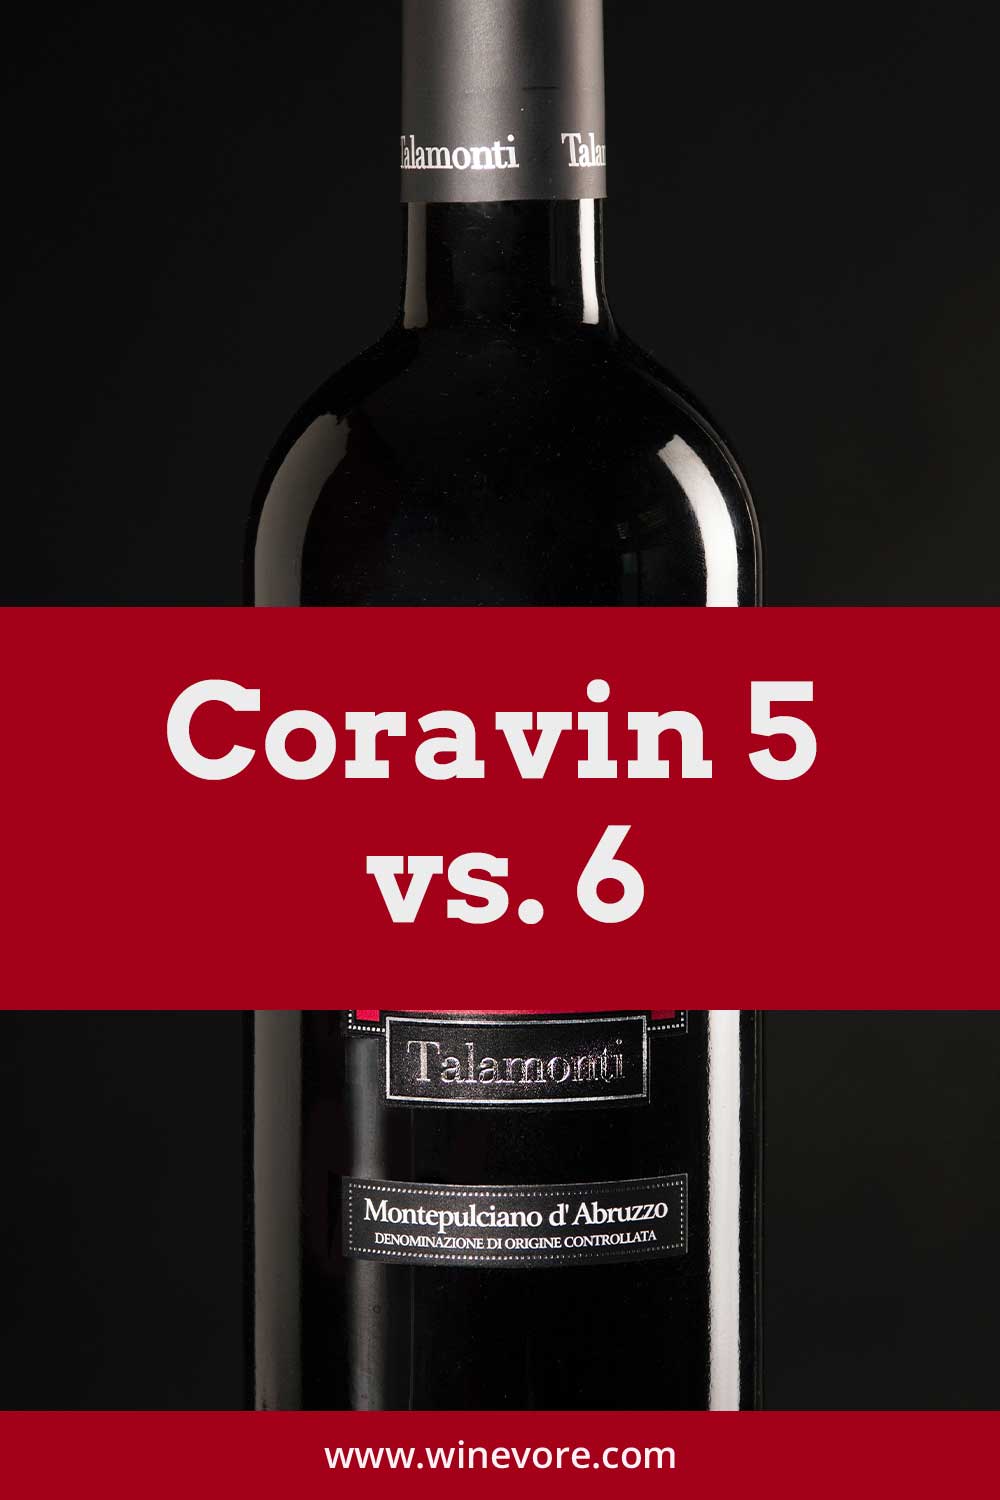 A wine bottle in front of black background - Coravin 5 vs. 6.